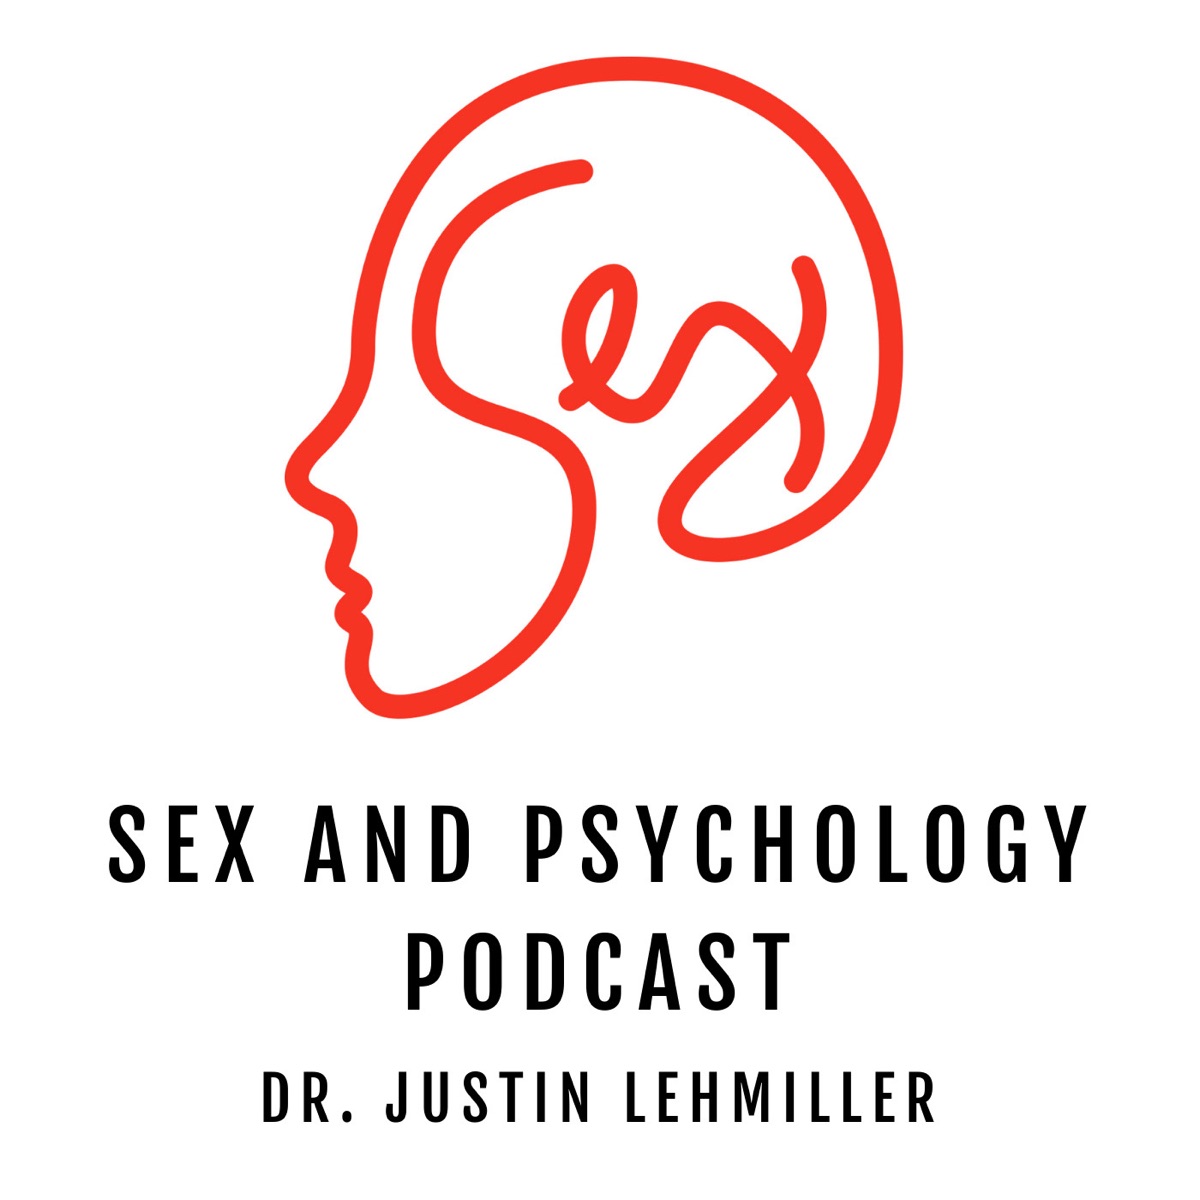 Sex and Psychology Podcast Podcast photo pic